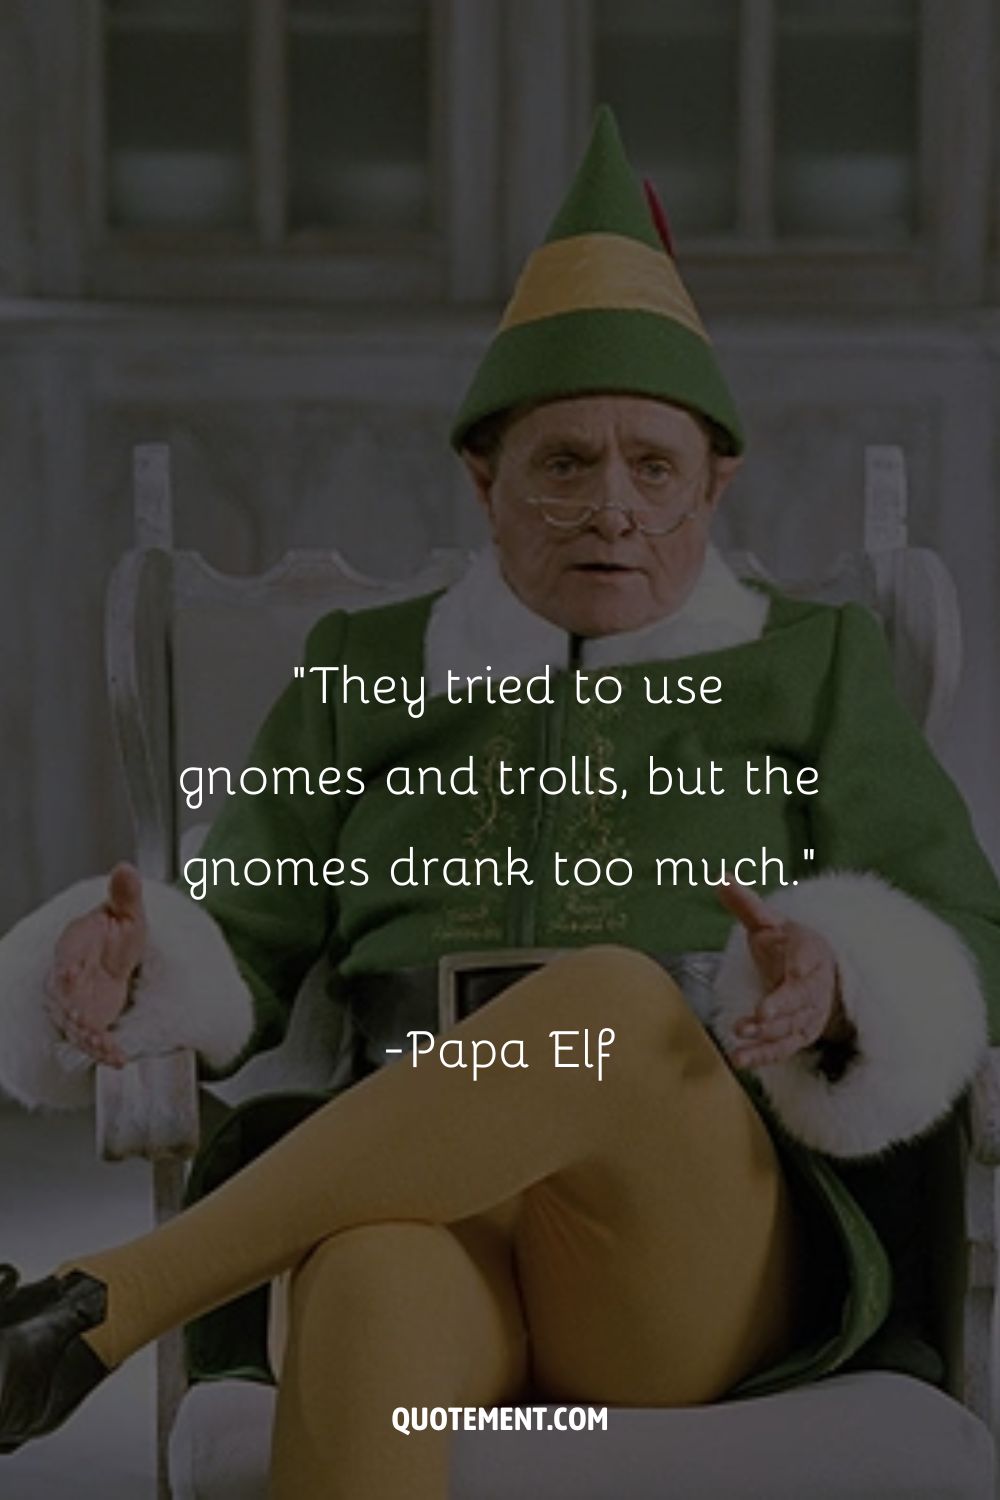 Image of Papa the Elf sitting engaged in conversation.